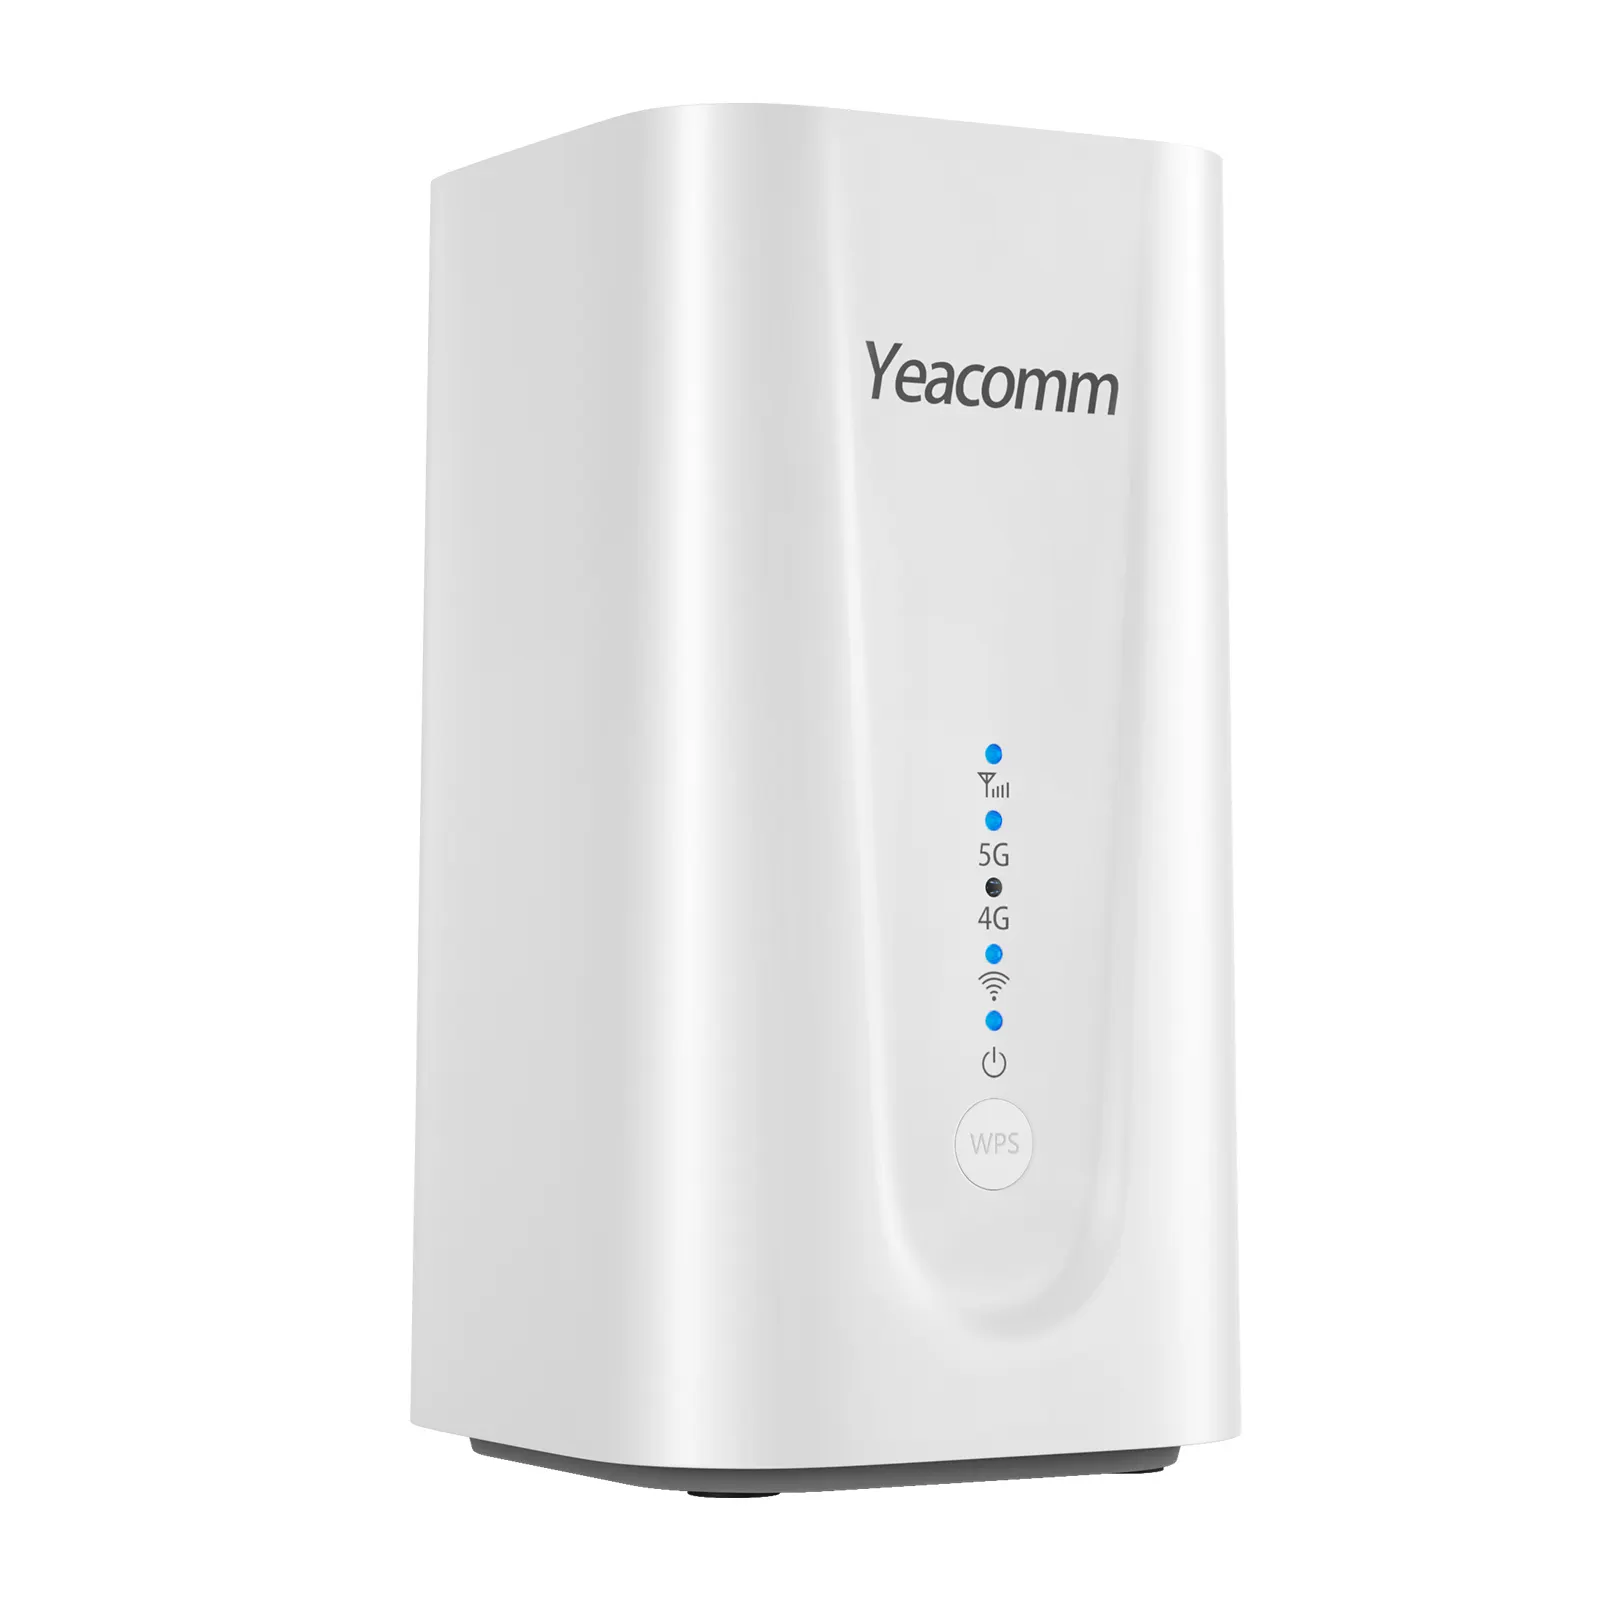 Yeacomm NR330-U Support SA NSA Gigabit WIFI6 AX1800 LTE 4G 5G CPE Router with Sim Card Slot